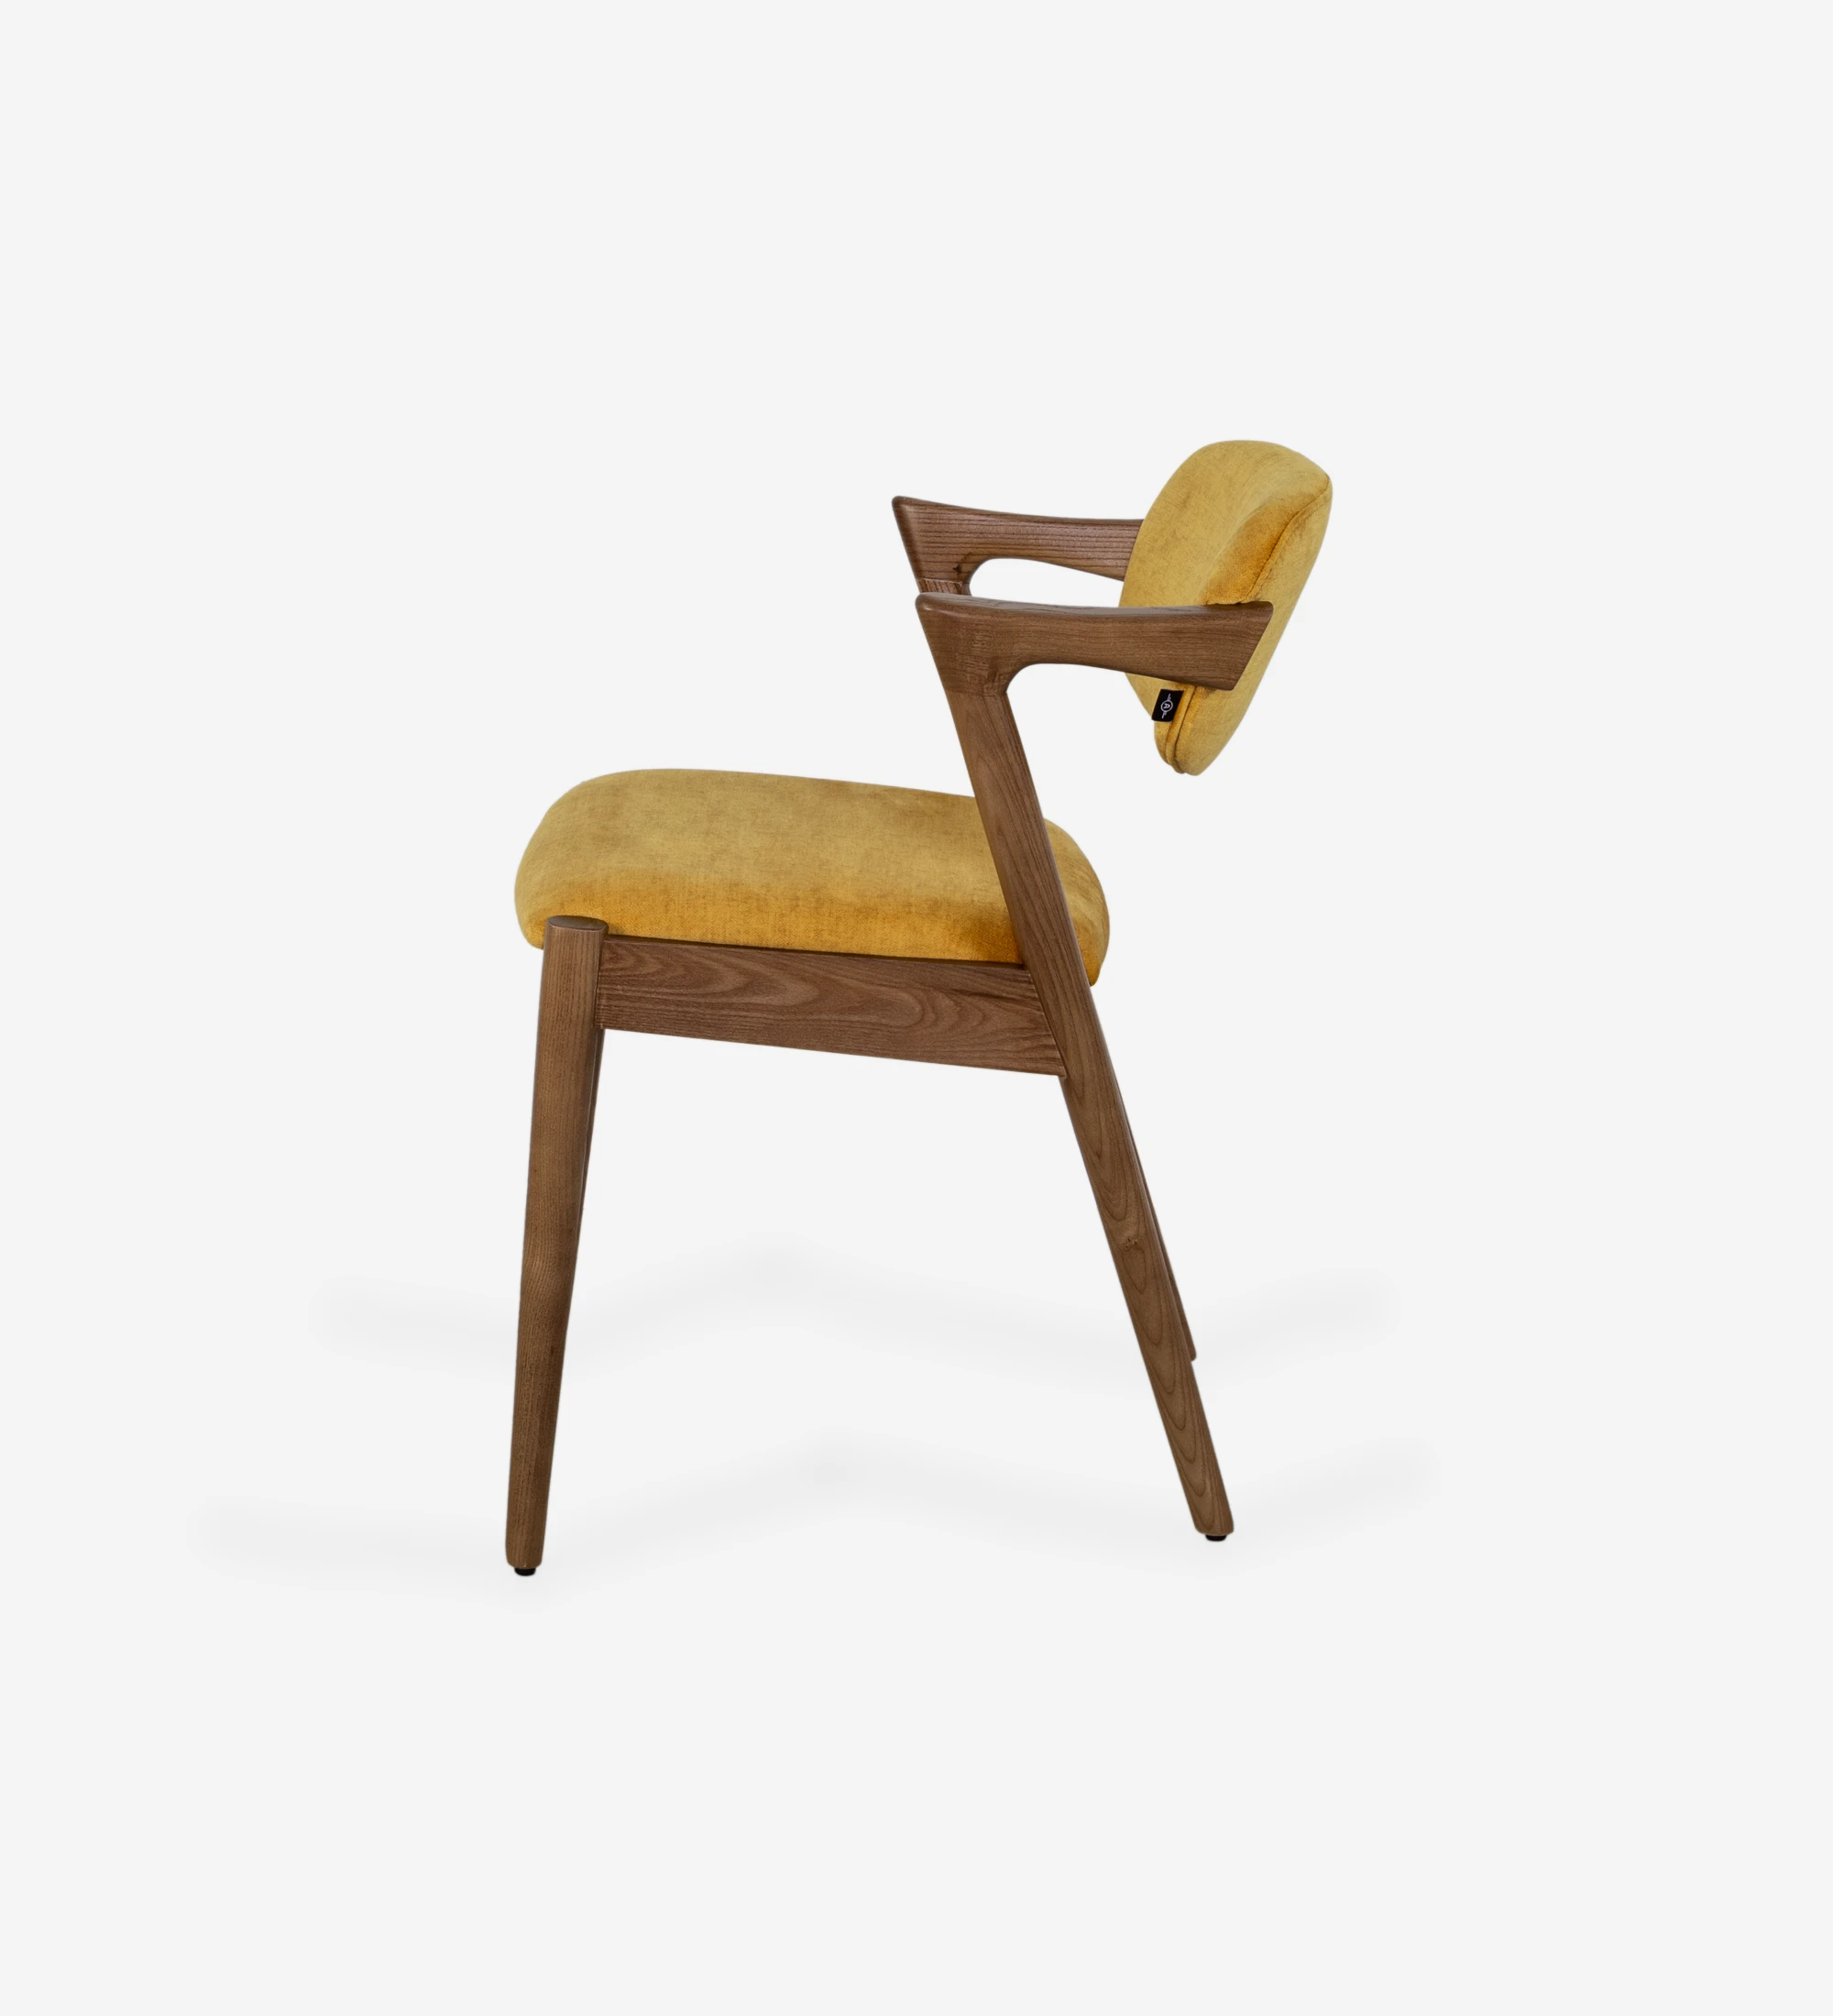 Chair with walnut wood structure, with seat and back upholstered in fabric.